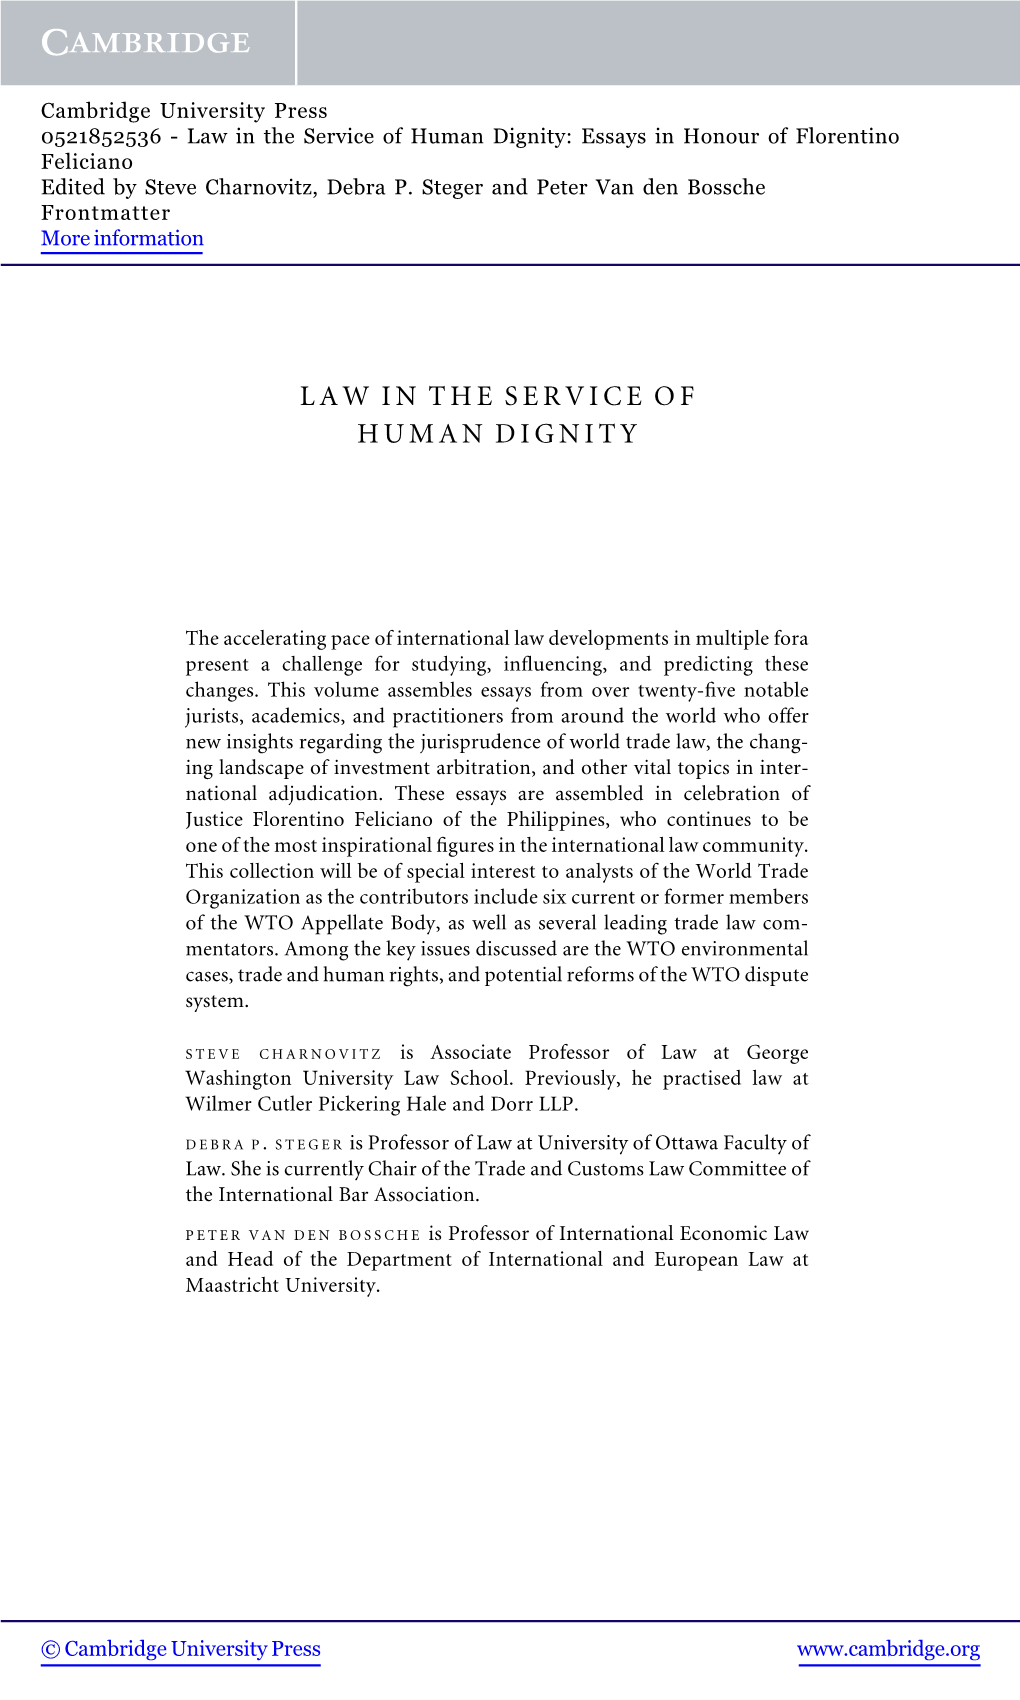 Law in the Service of Human Dignity: Essays in Honour of Florentino Feliciano Edited by Steve Charnovitz, Debra P